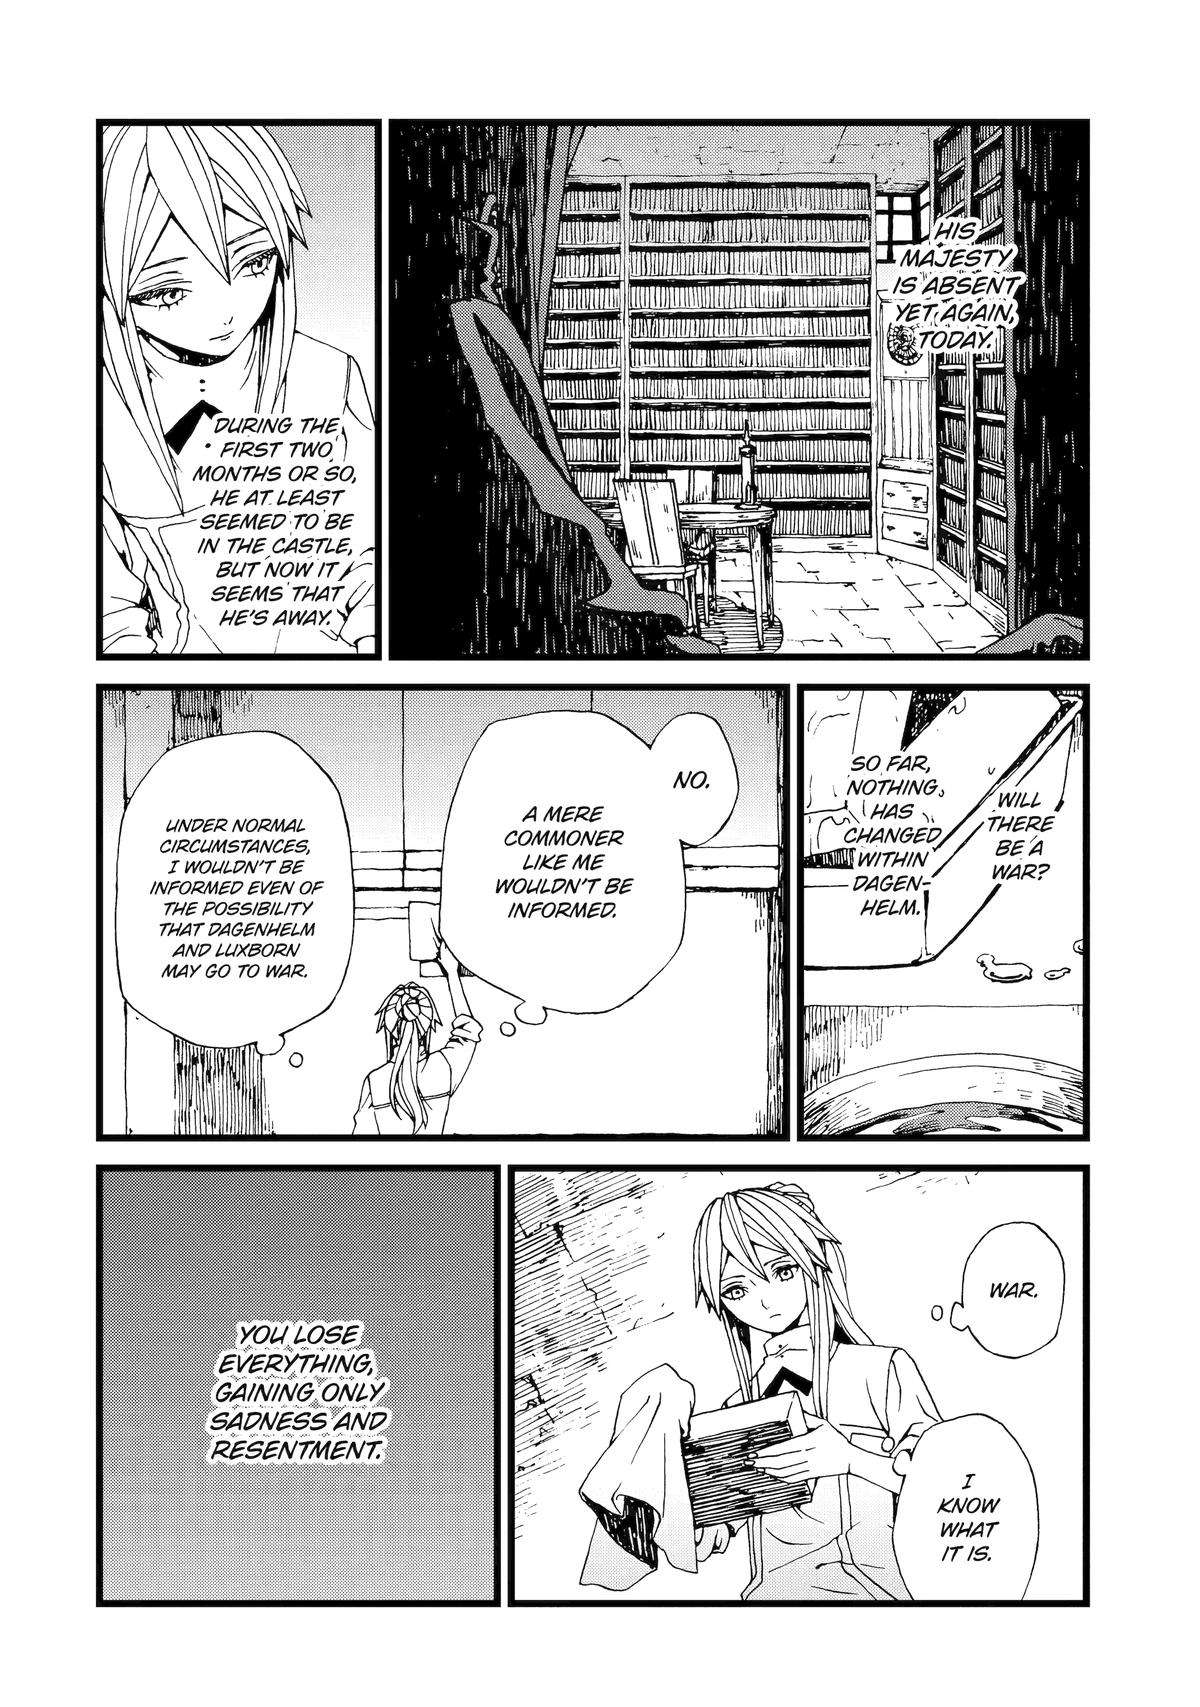 Even Monsters Like Fairytales - chapter 12 - #4